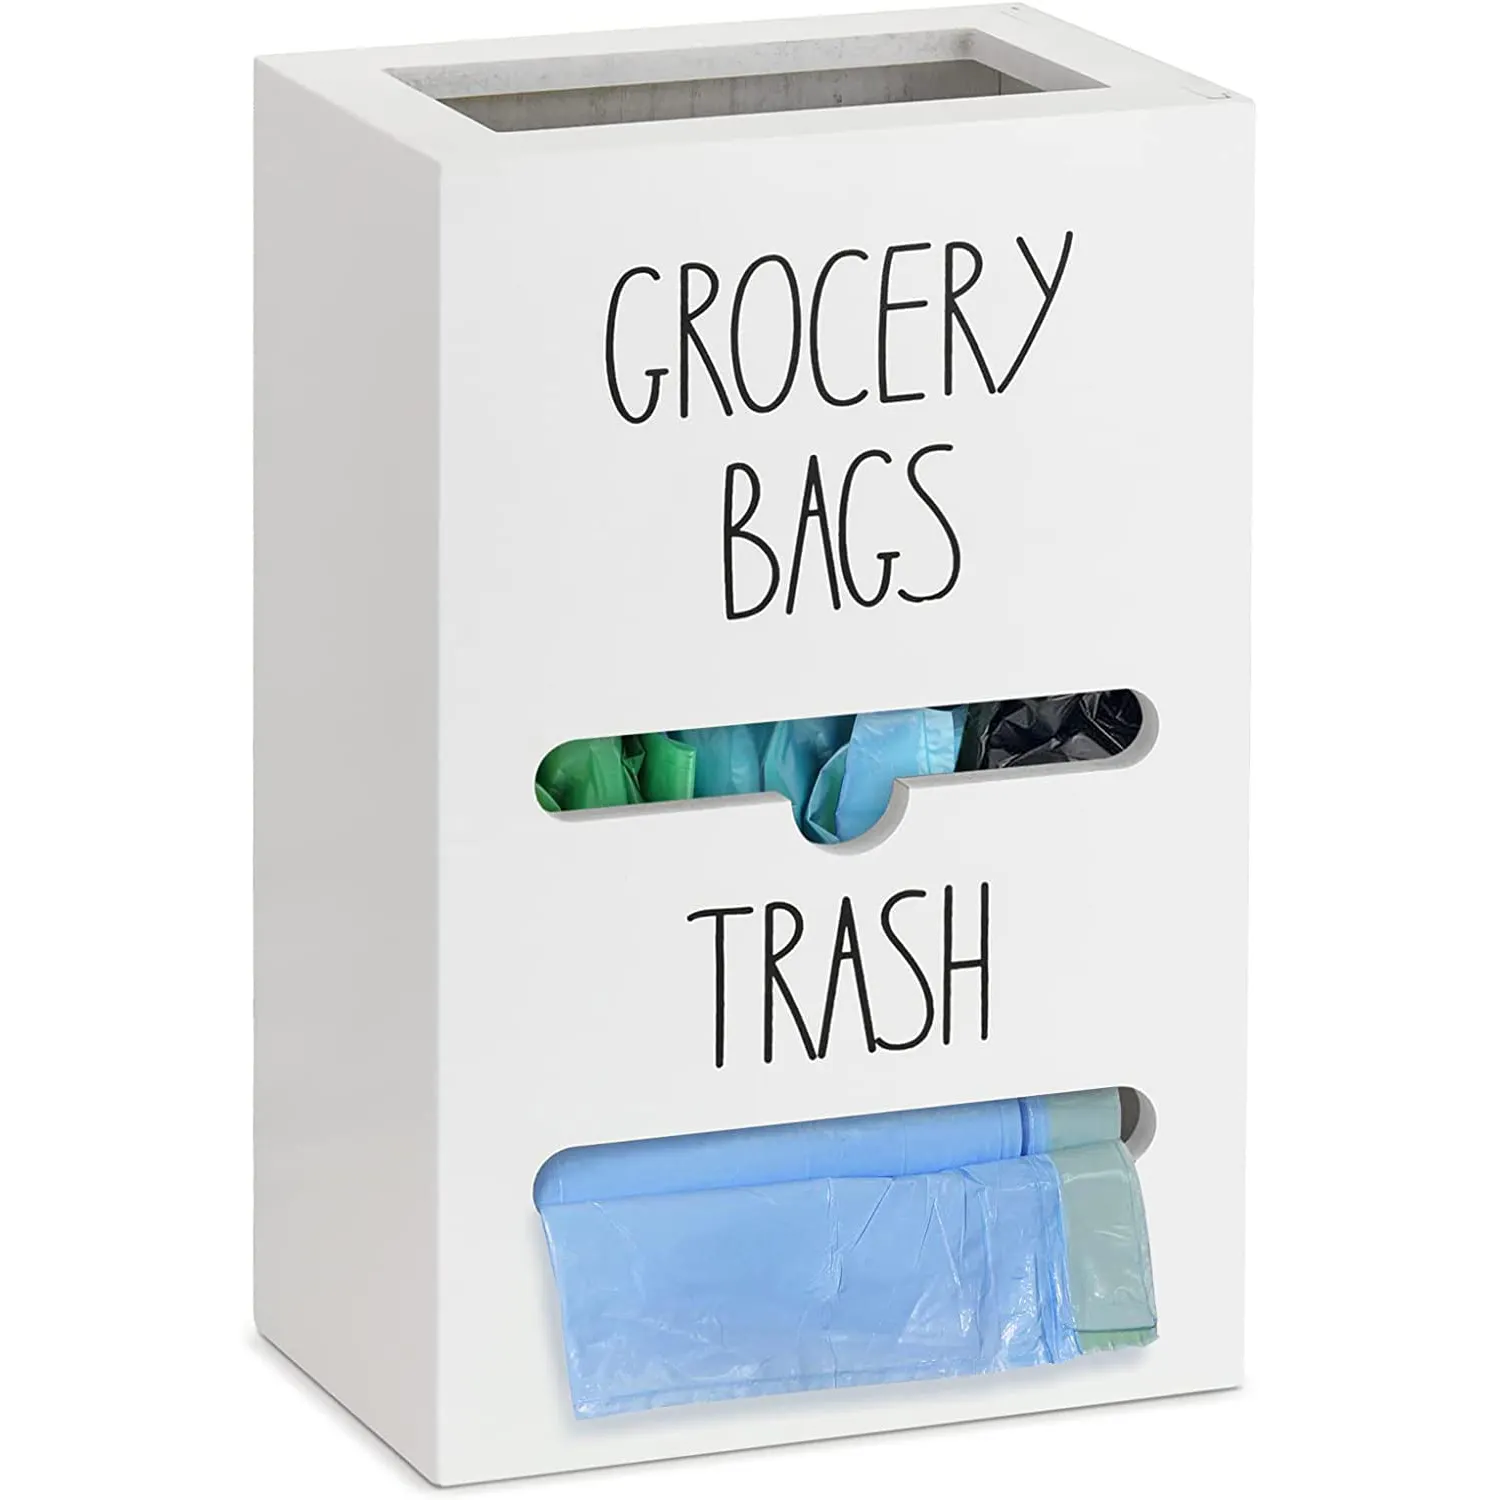 Durable Space Saving White Wood Plastic Dispenser Grocery And Trash Bag Holder 2 In 1